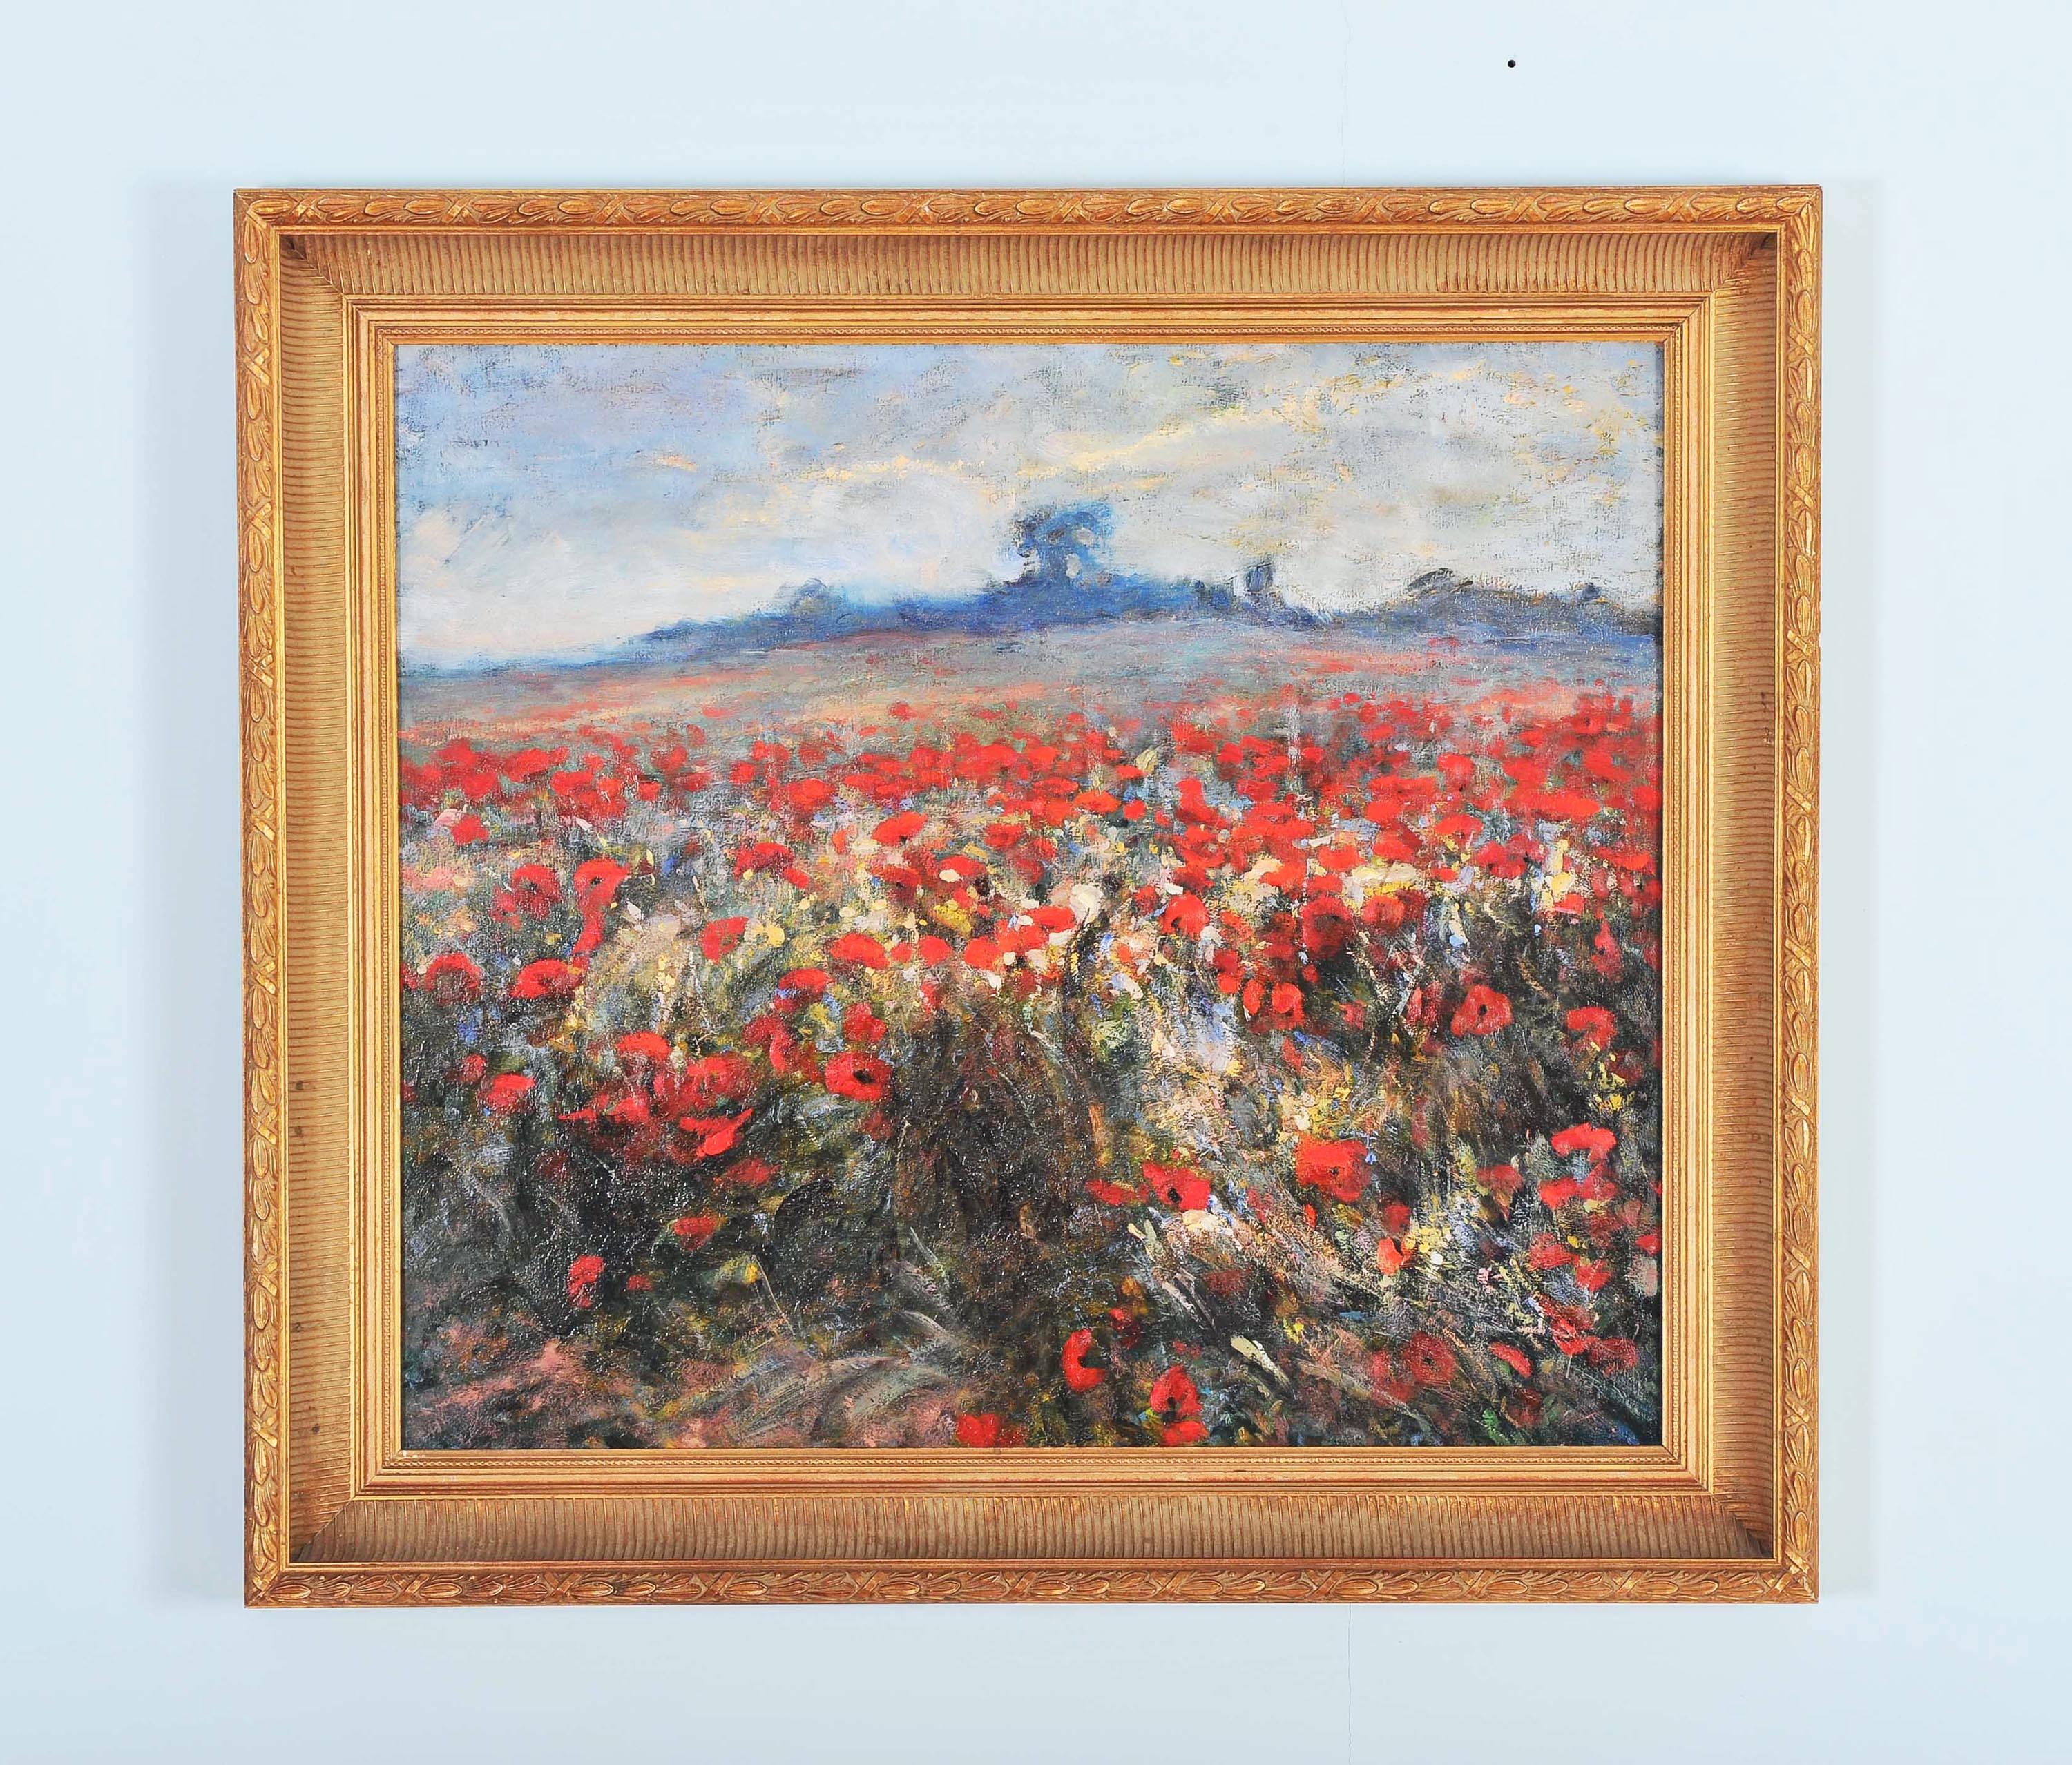 Contemporary Oil on Canvas titled 'Poppies' by J Wanat